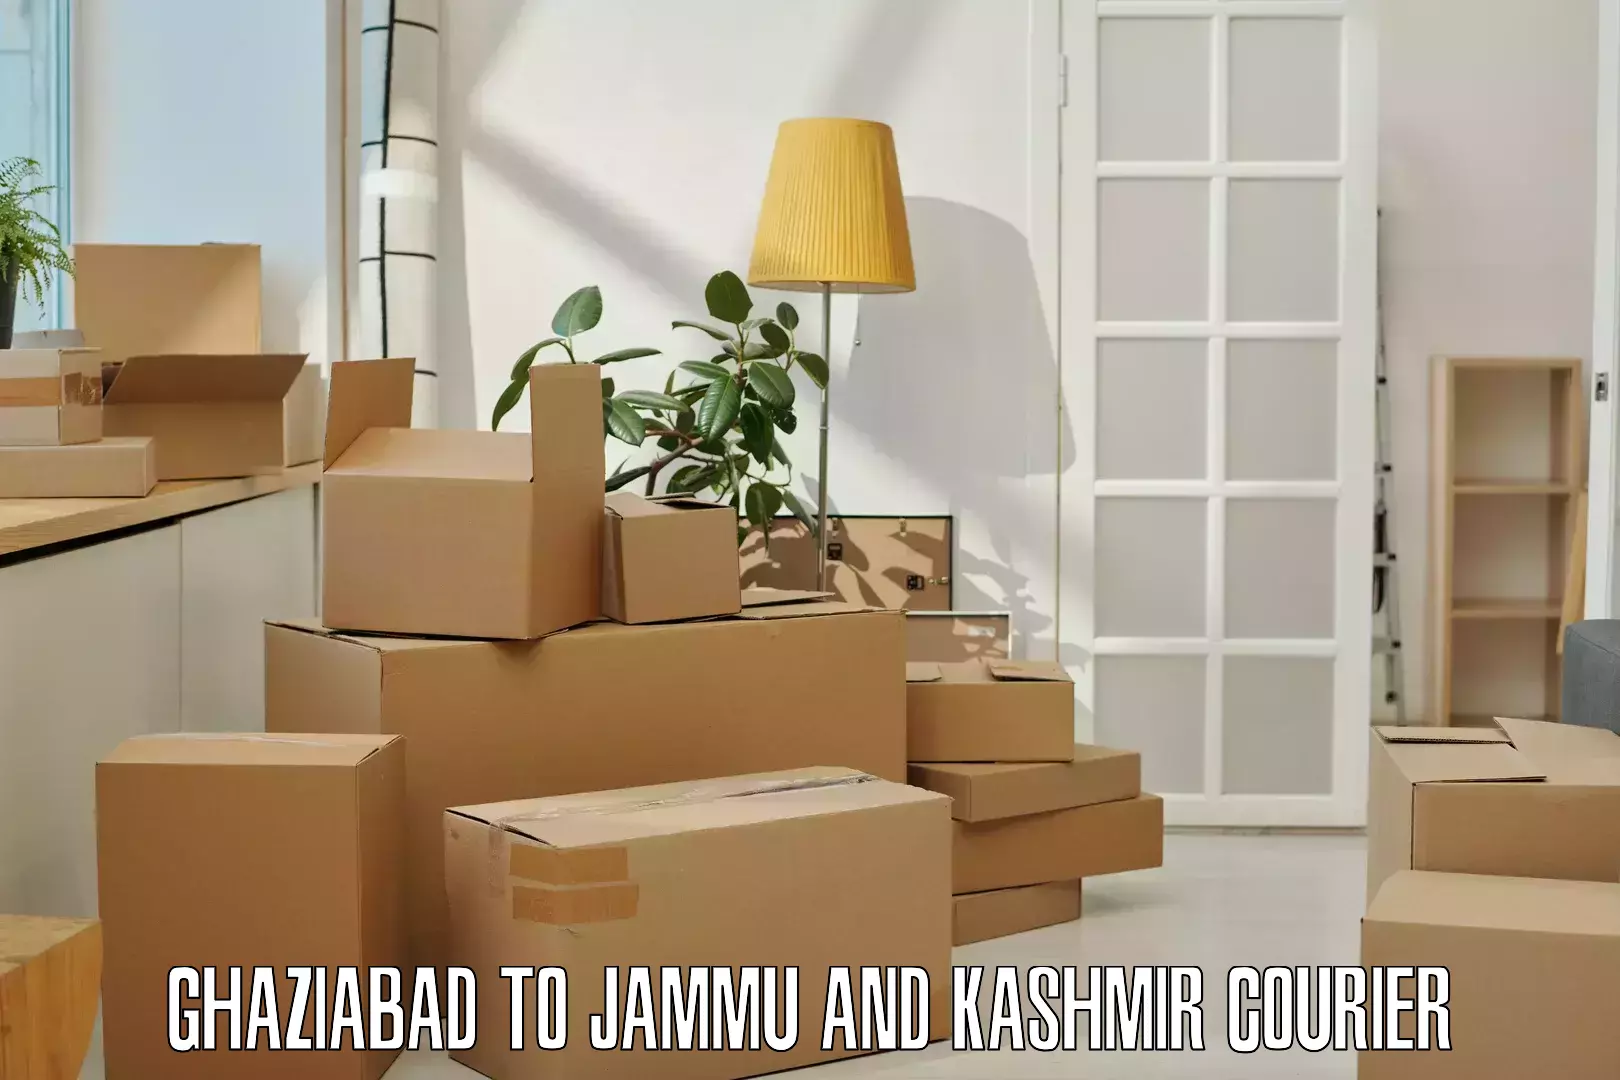 24-hour delivery options Ghaziabad to University of Kashmir Srinagar